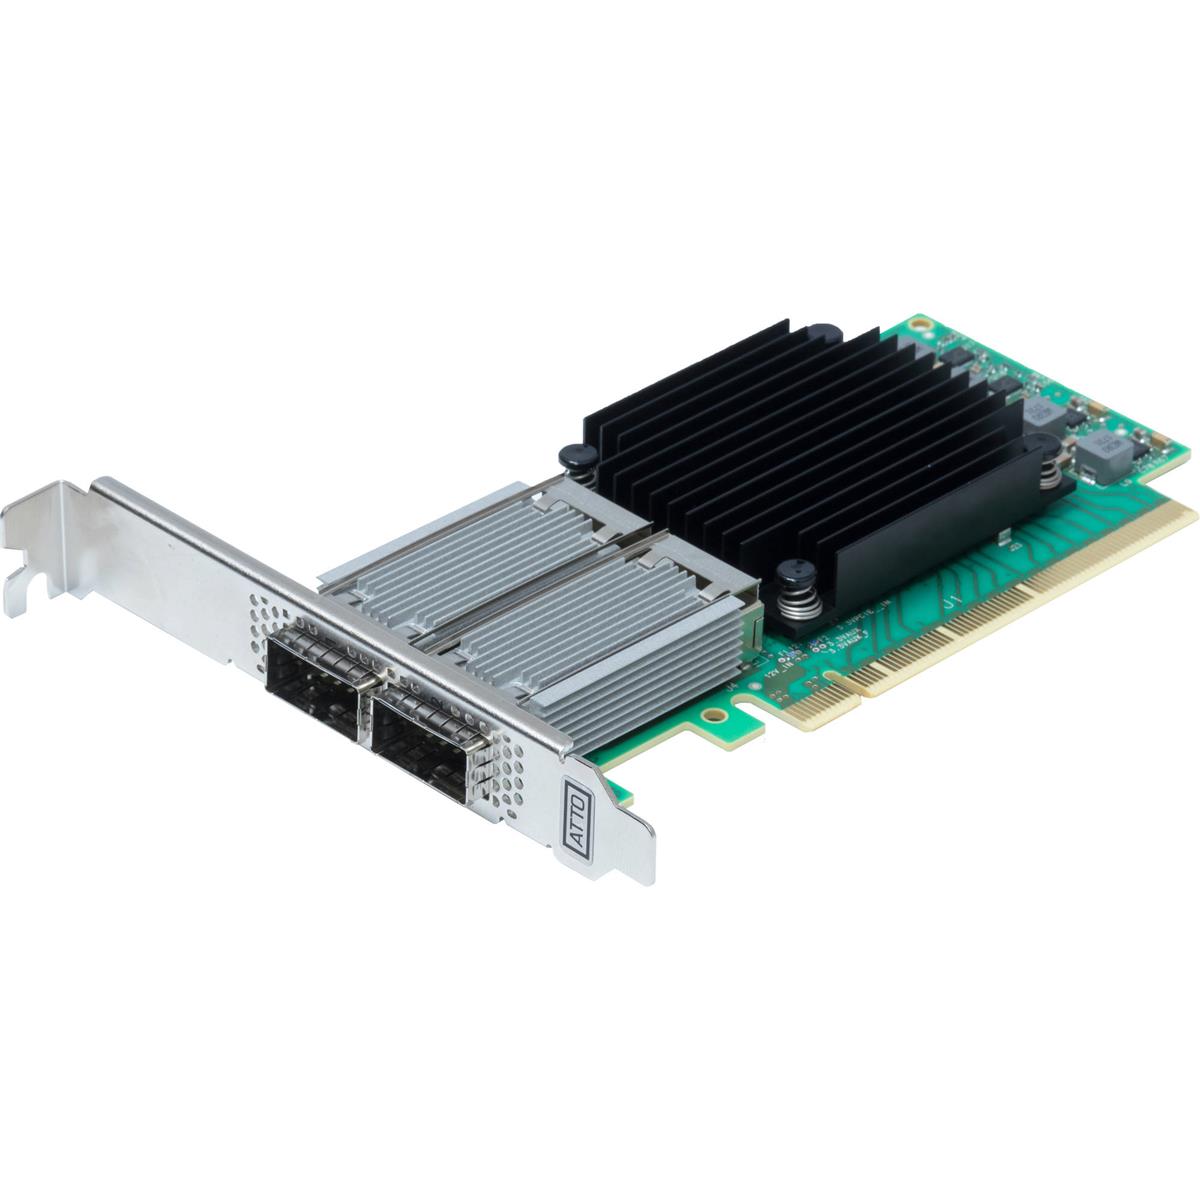 Image of ATTO Technology FastFrame N312 2-Ch 10/25/40/50/100GbE x16 PCIe 3.0 Adapter